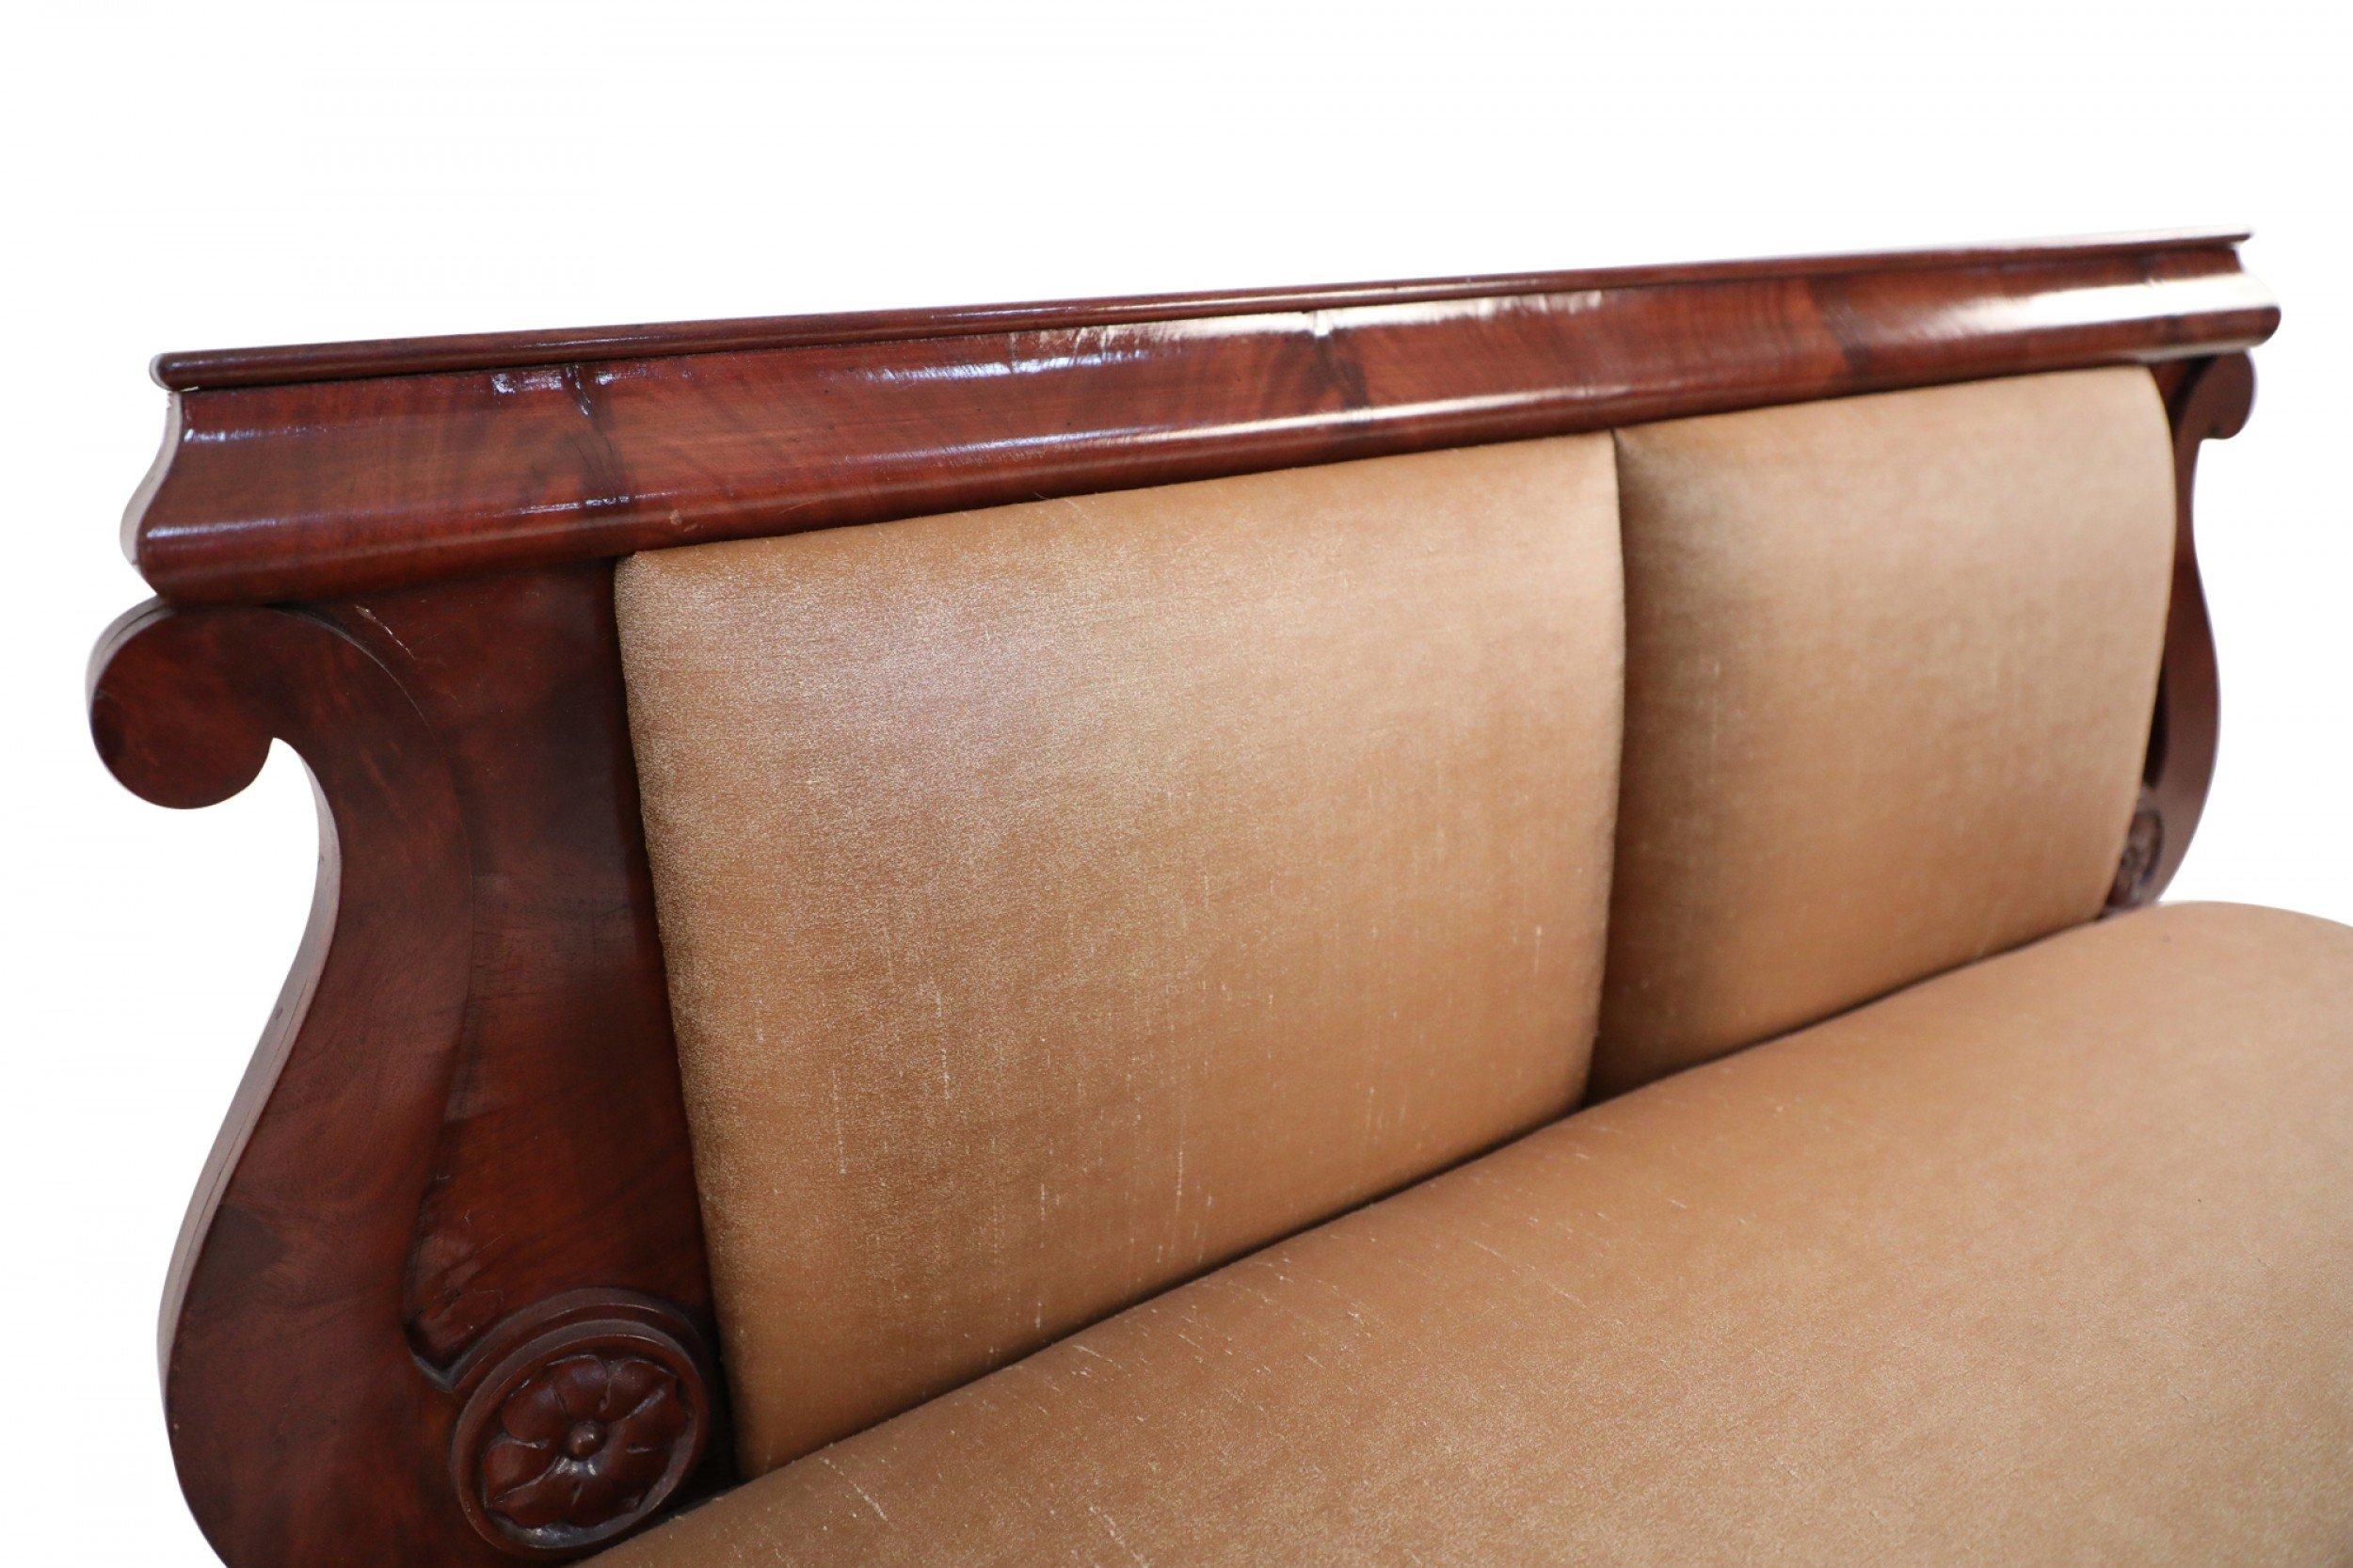 North American Pair of American Empire Crotch Mahogany Veneer Upholstered Window Seats For Sale